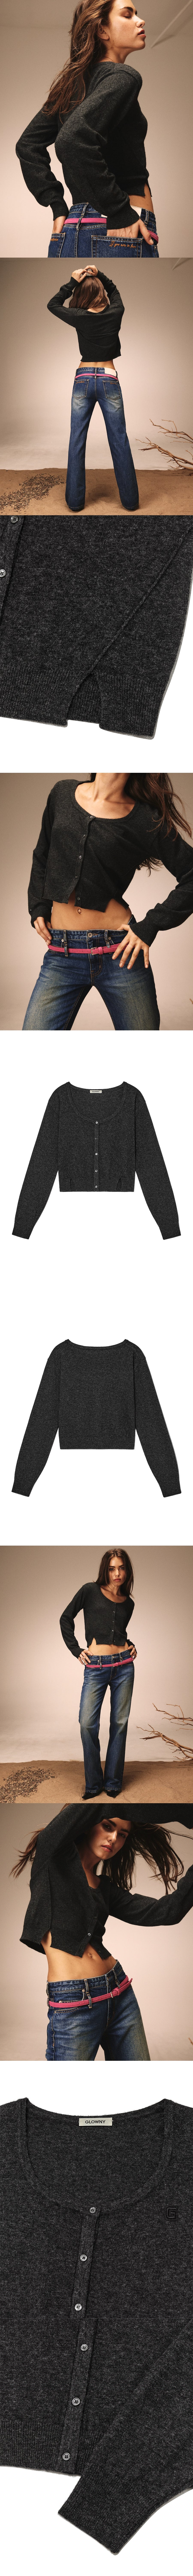 PEGGY WOOL CASHMERE KNIT CARDIGAN (CHARCOAL)